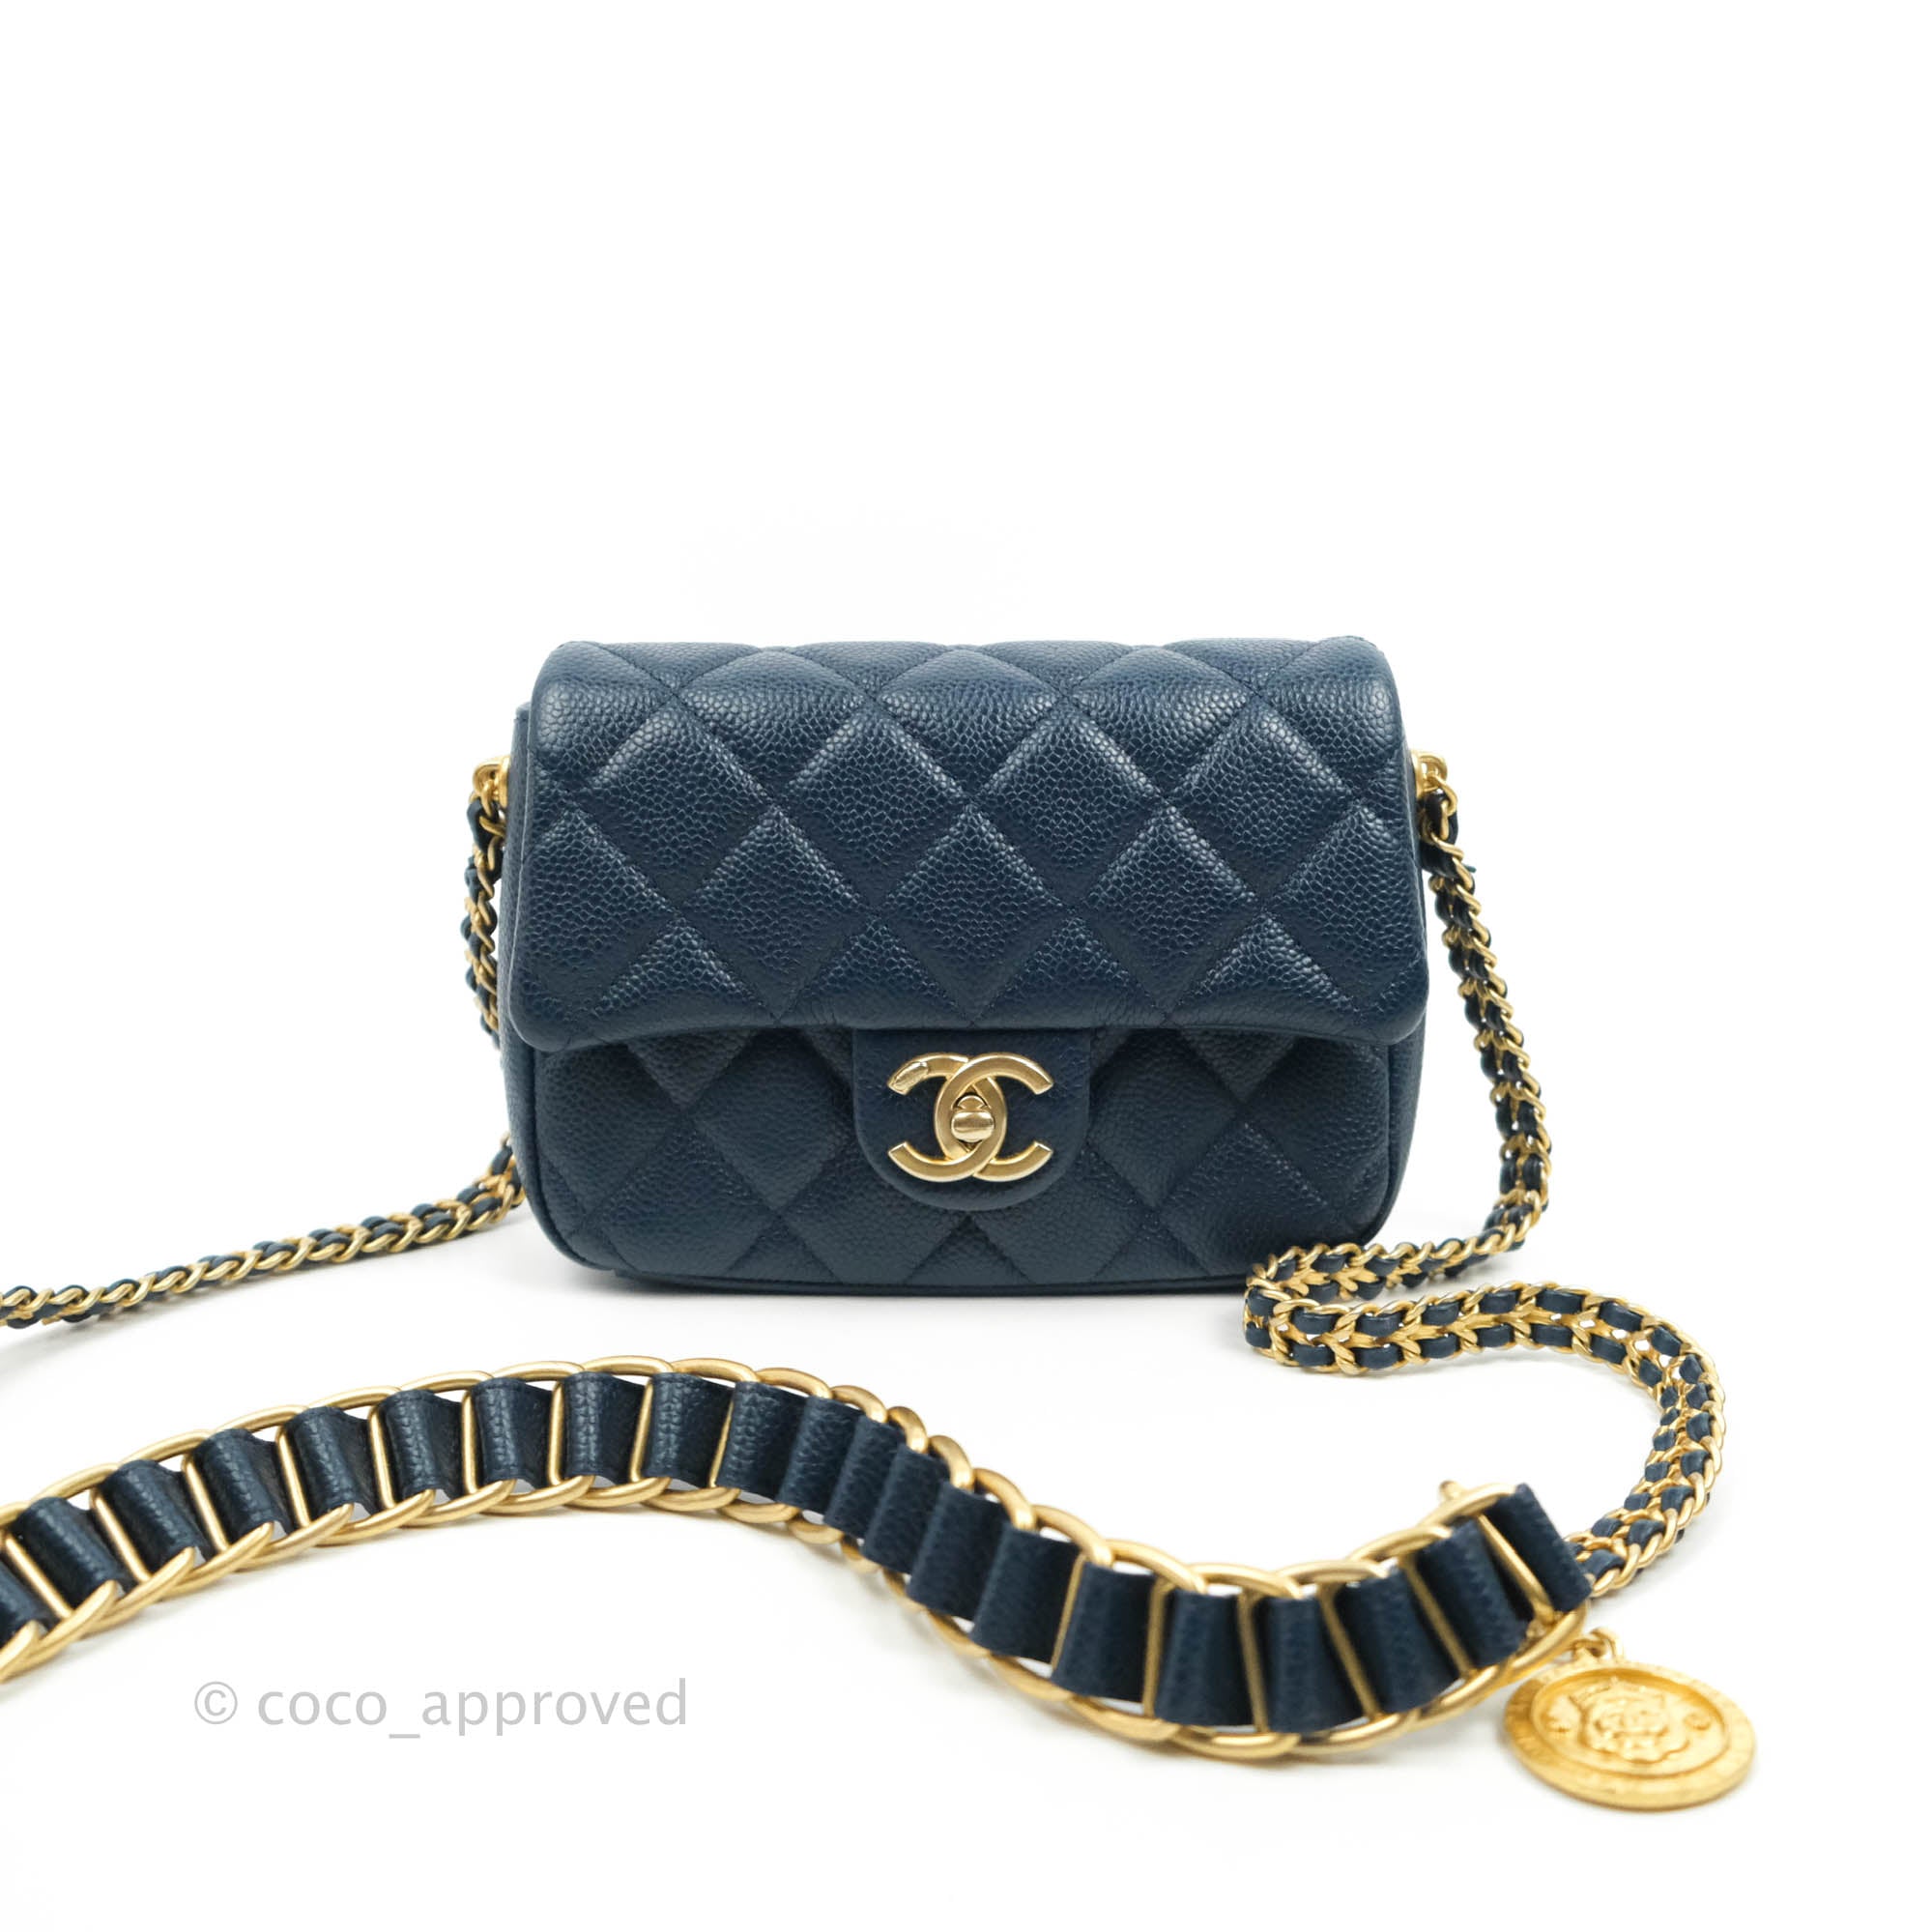 Tiny Chanel + Louis Vuitton Bags - Mini Quilted Handbags with Real Chain 